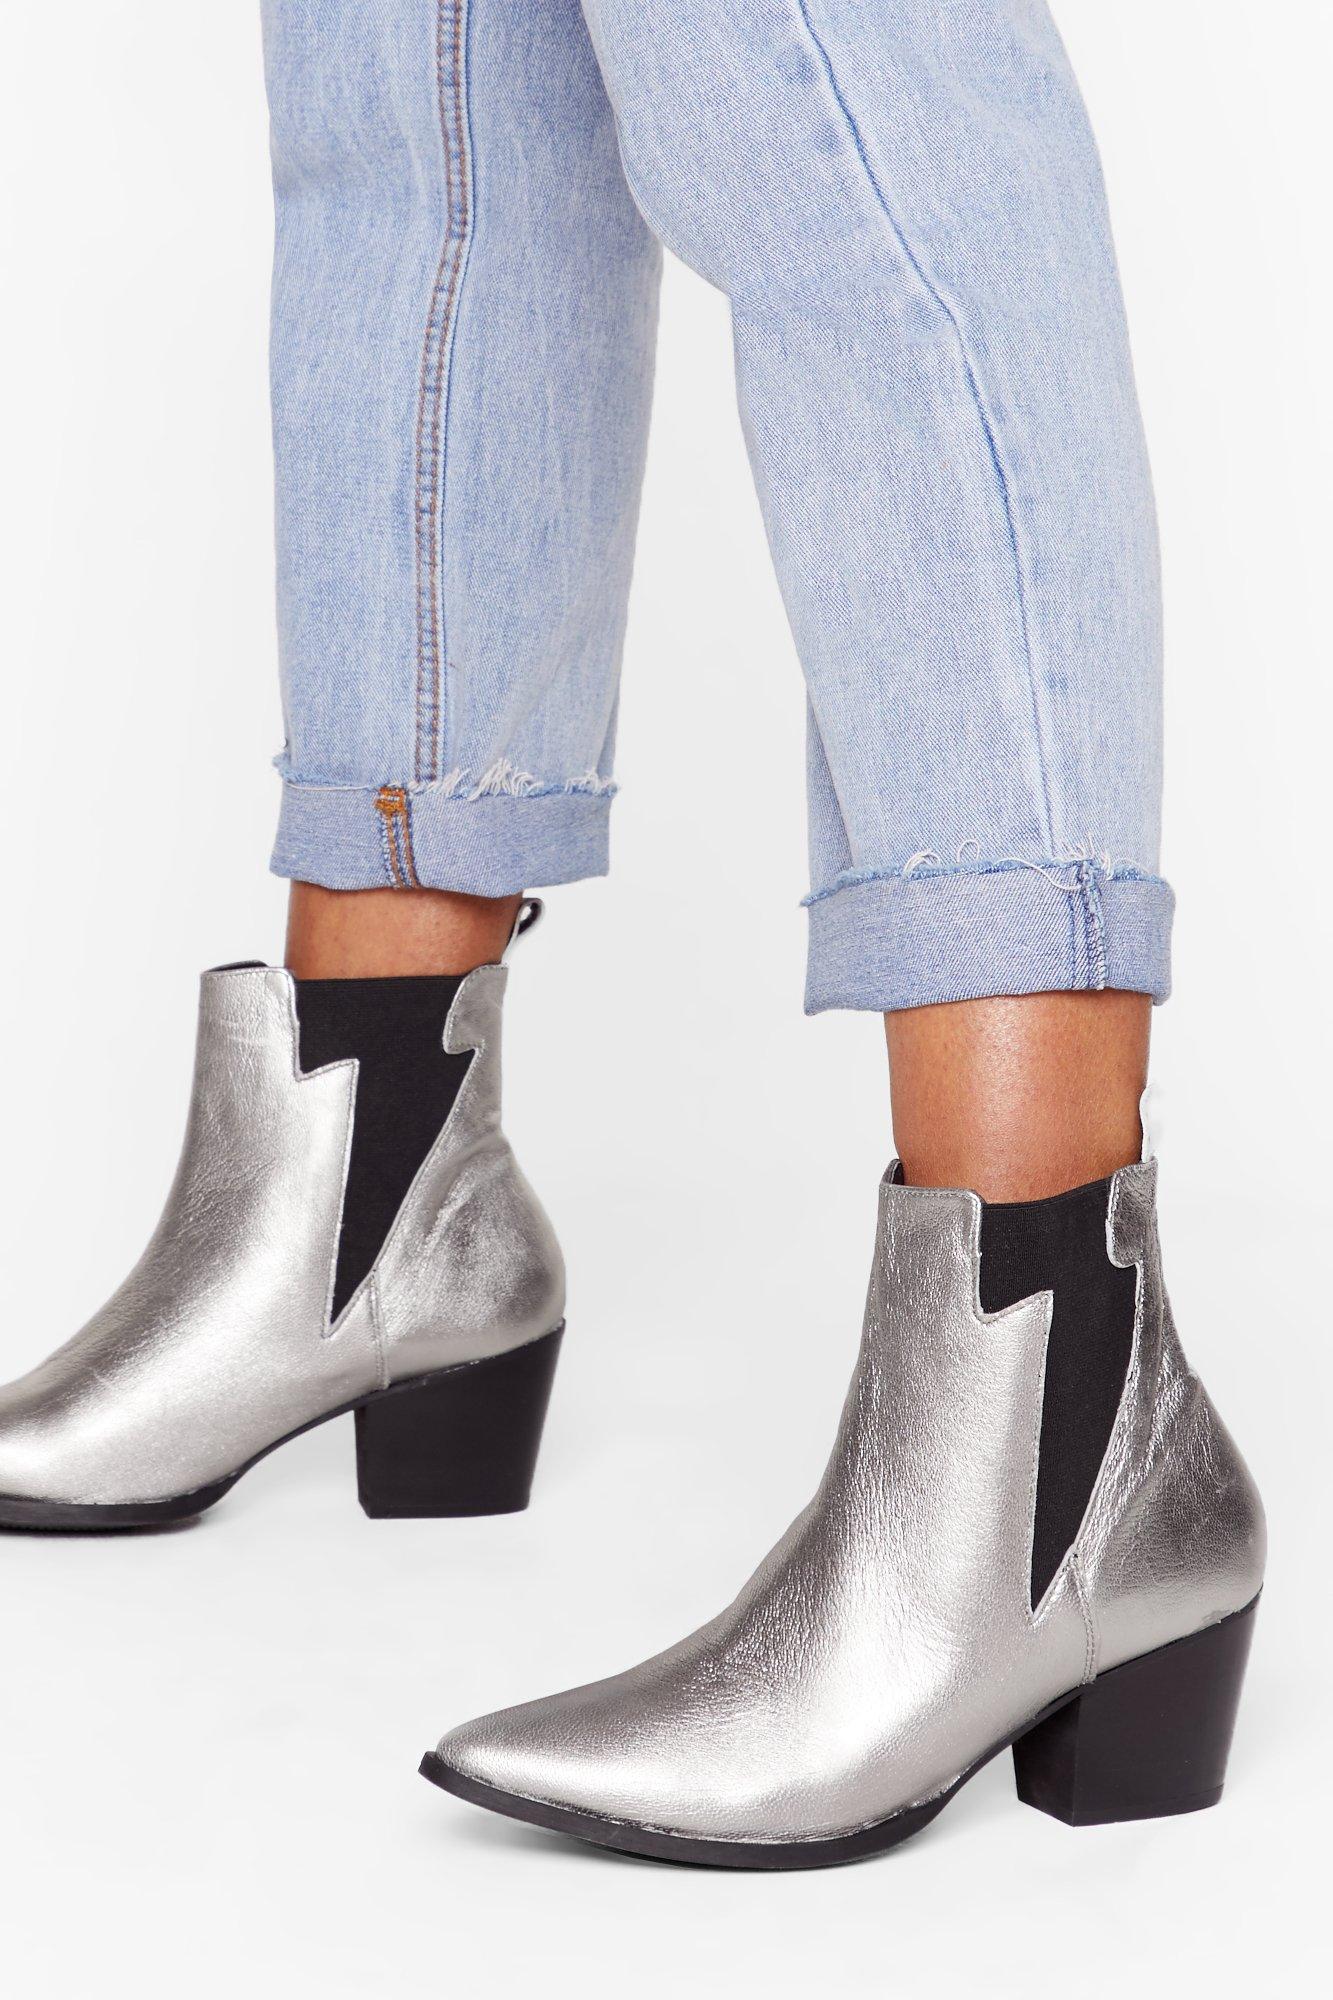 silver chelsea boots